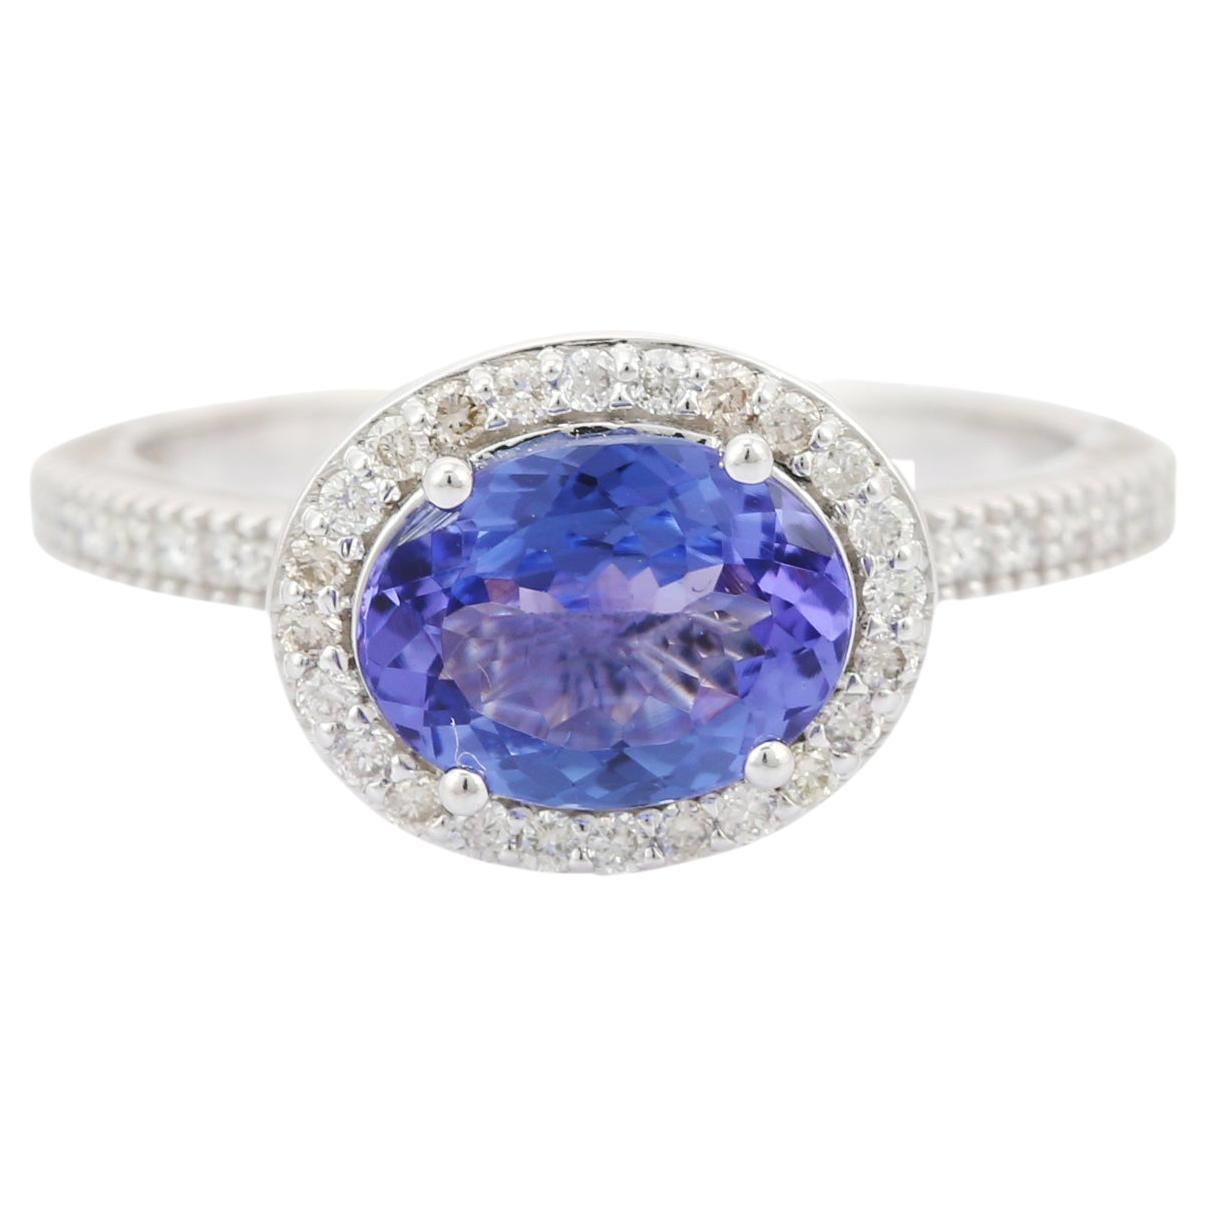 For Sale:  Oval Shaped Tanzanite and Diamond Ring in 18K White Gold